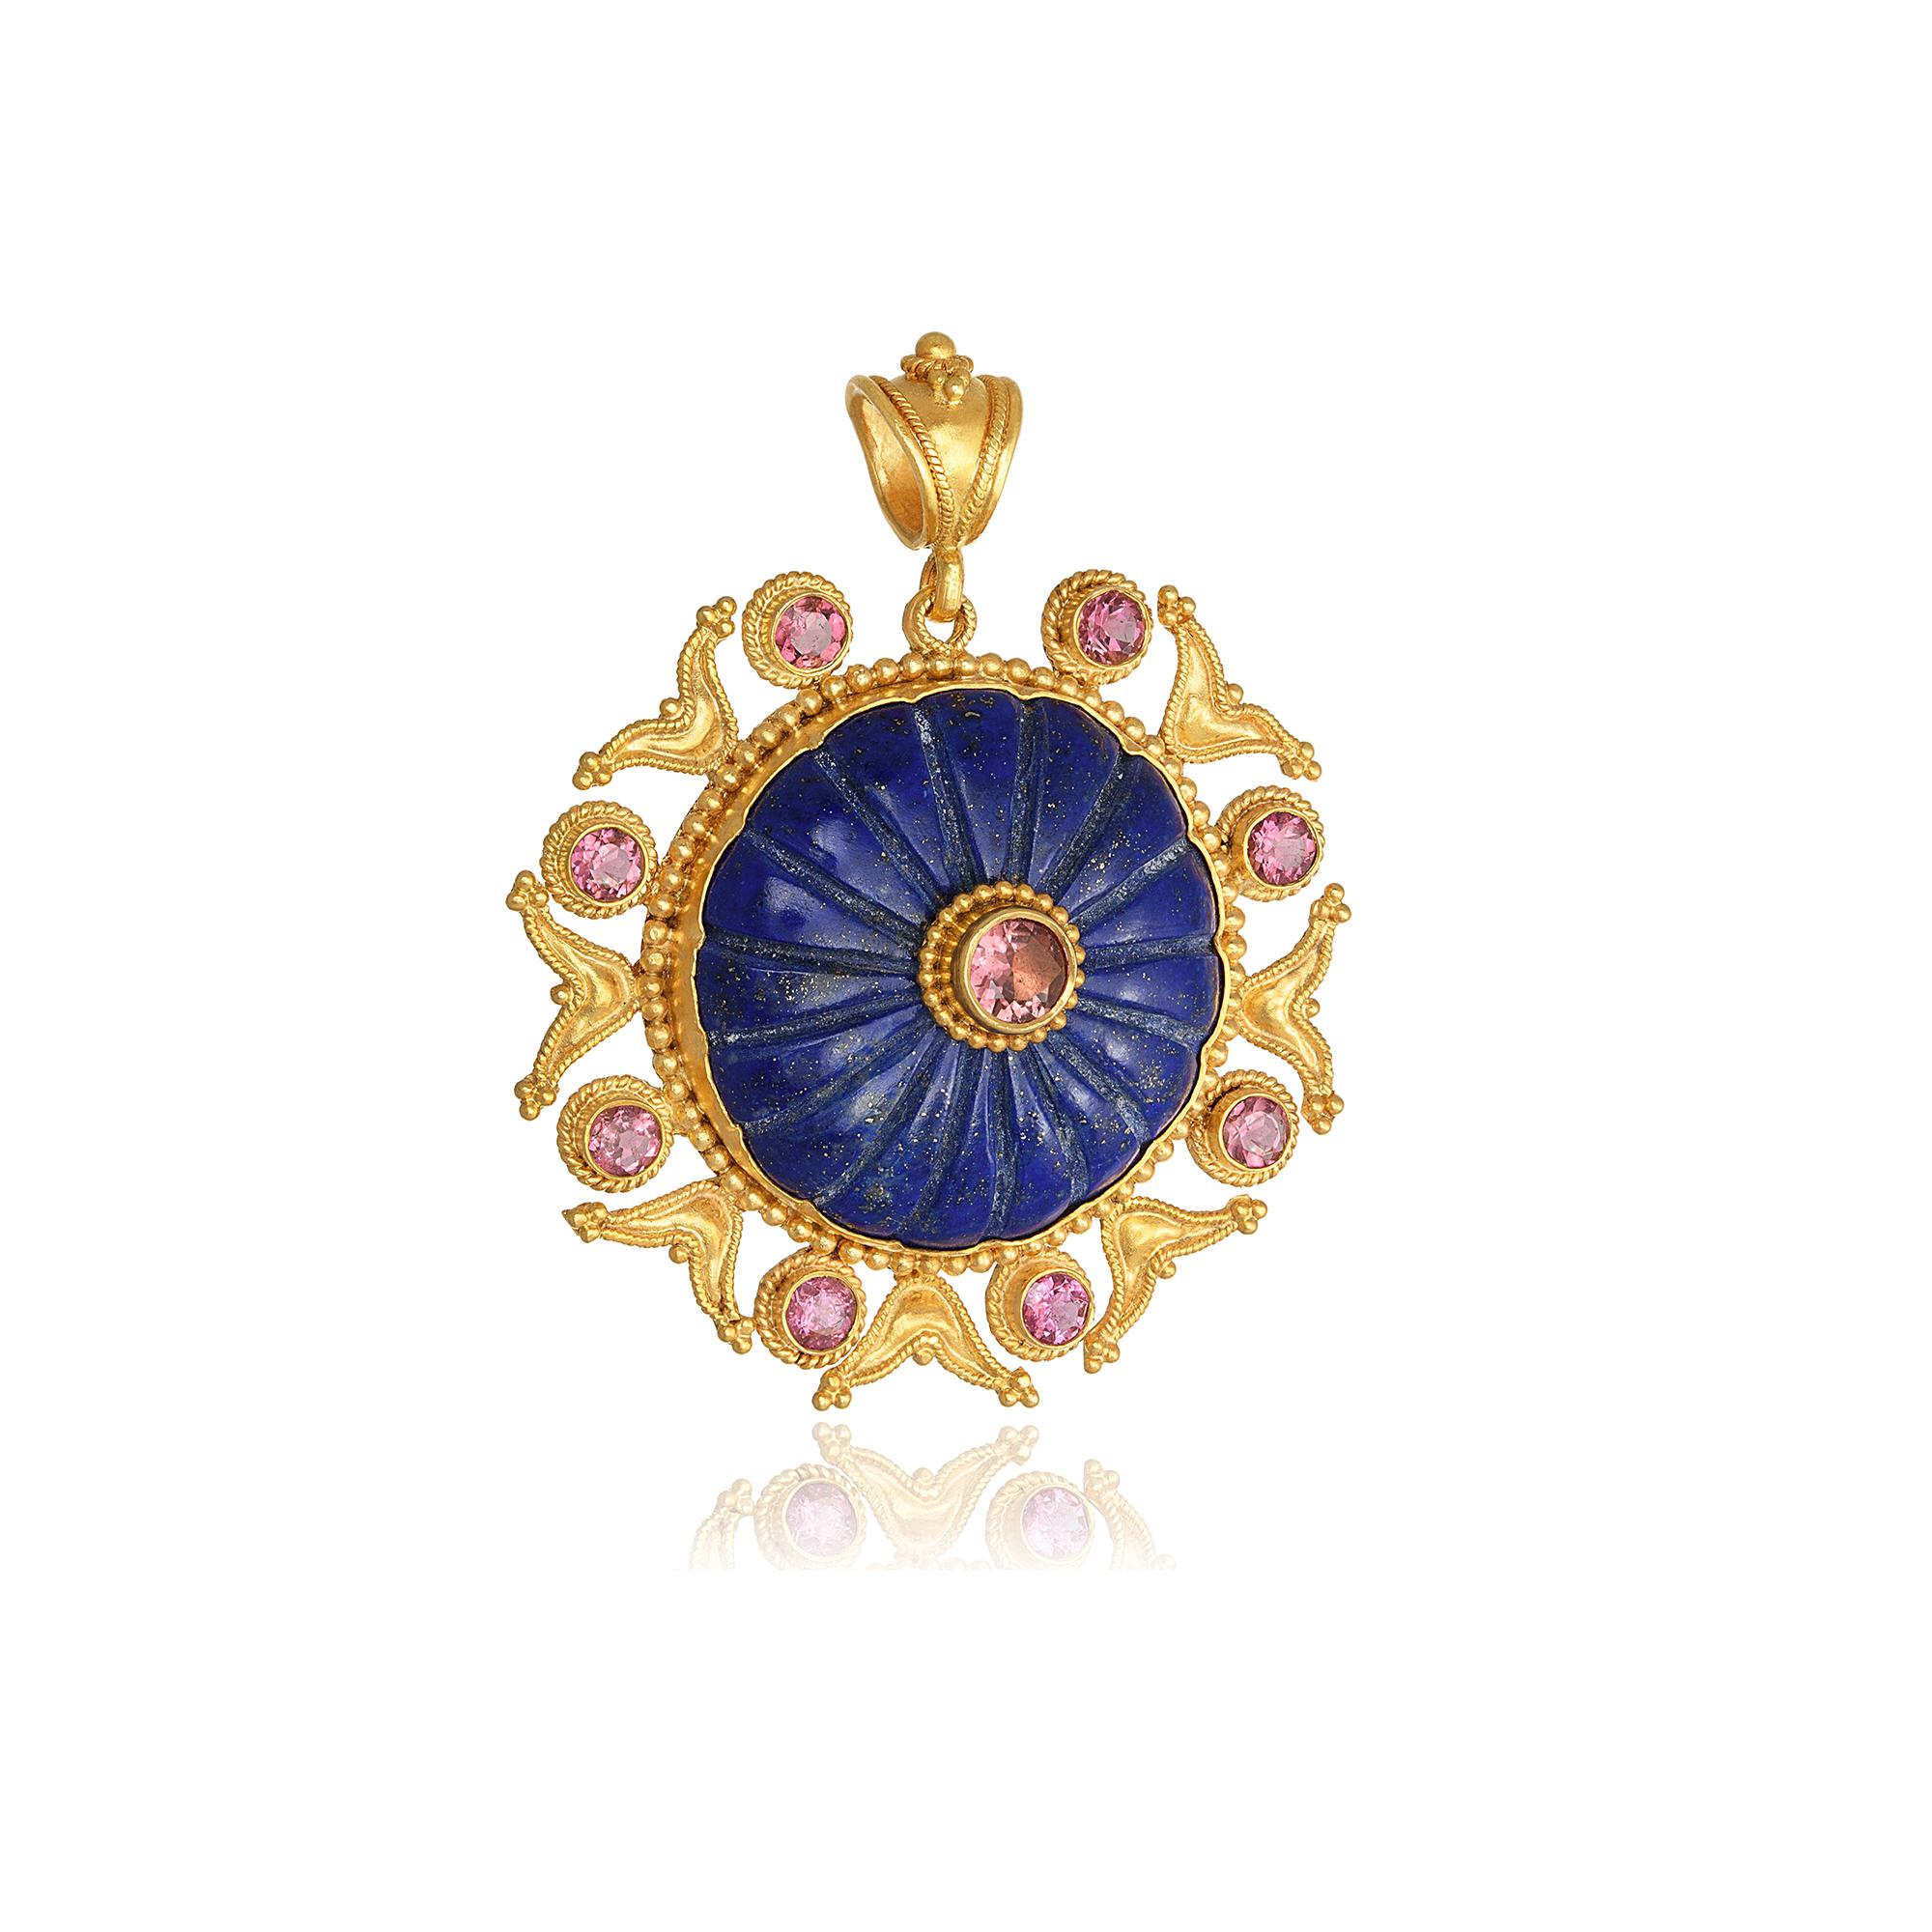 Granulation round flower shape pendant handcrafted in 22Kt yellow gold, featuring a hand carved Lapis Lazuli center and Tourmalines around it. This One-Of-A-Kind Pendant is created using the traditional techniques of granulation and filigree. These